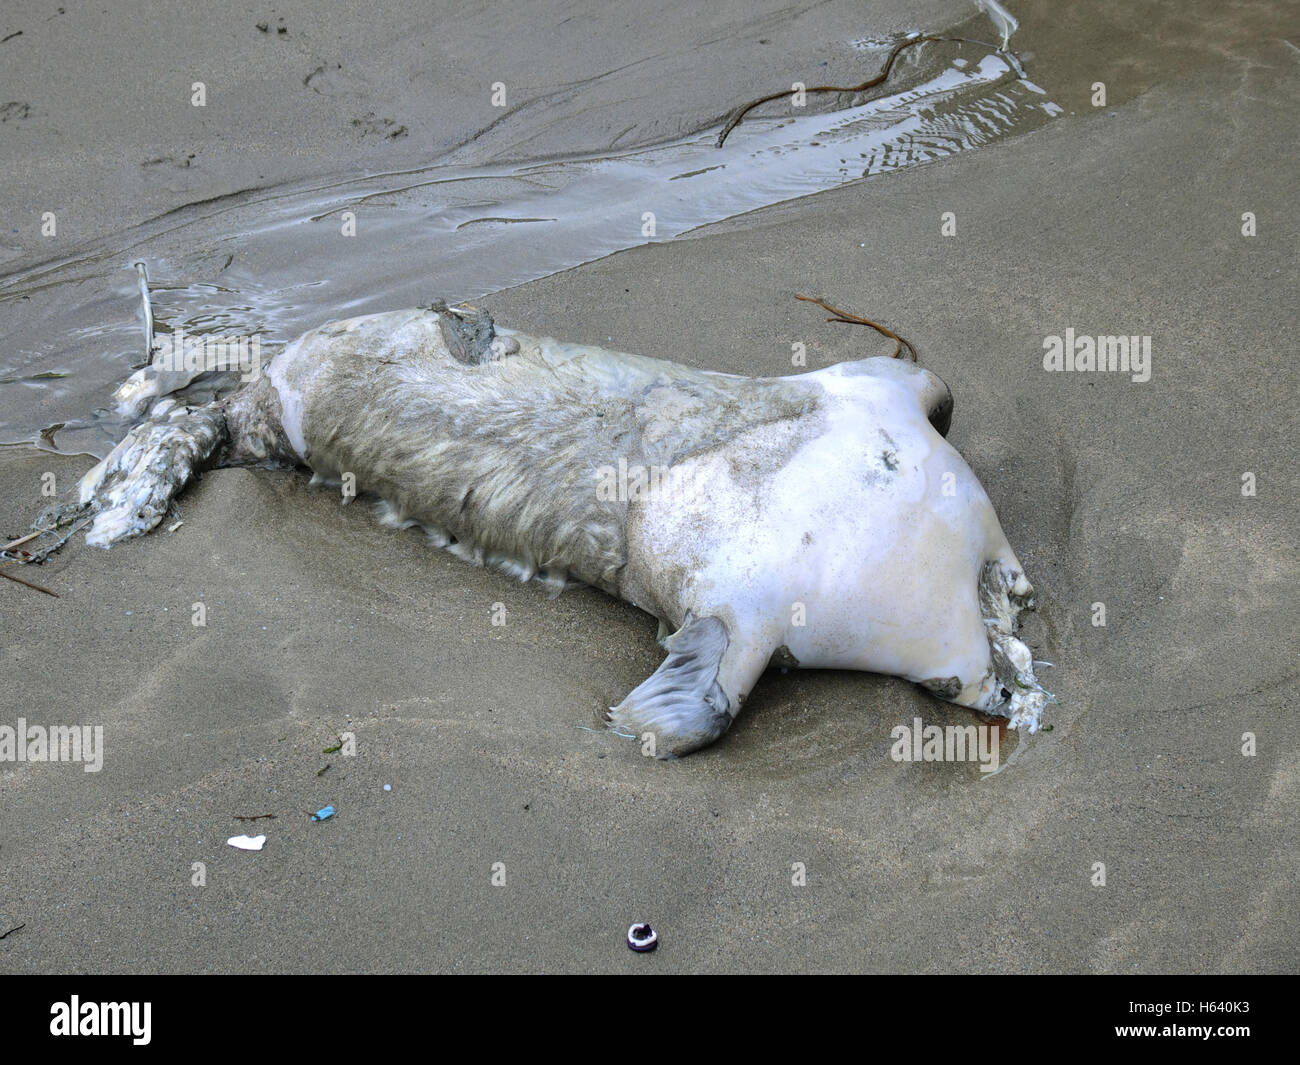 Decapitated Body of a Grey Seal Pup ( Halichoerus grypus ) on a Beach, UK Stock Photo